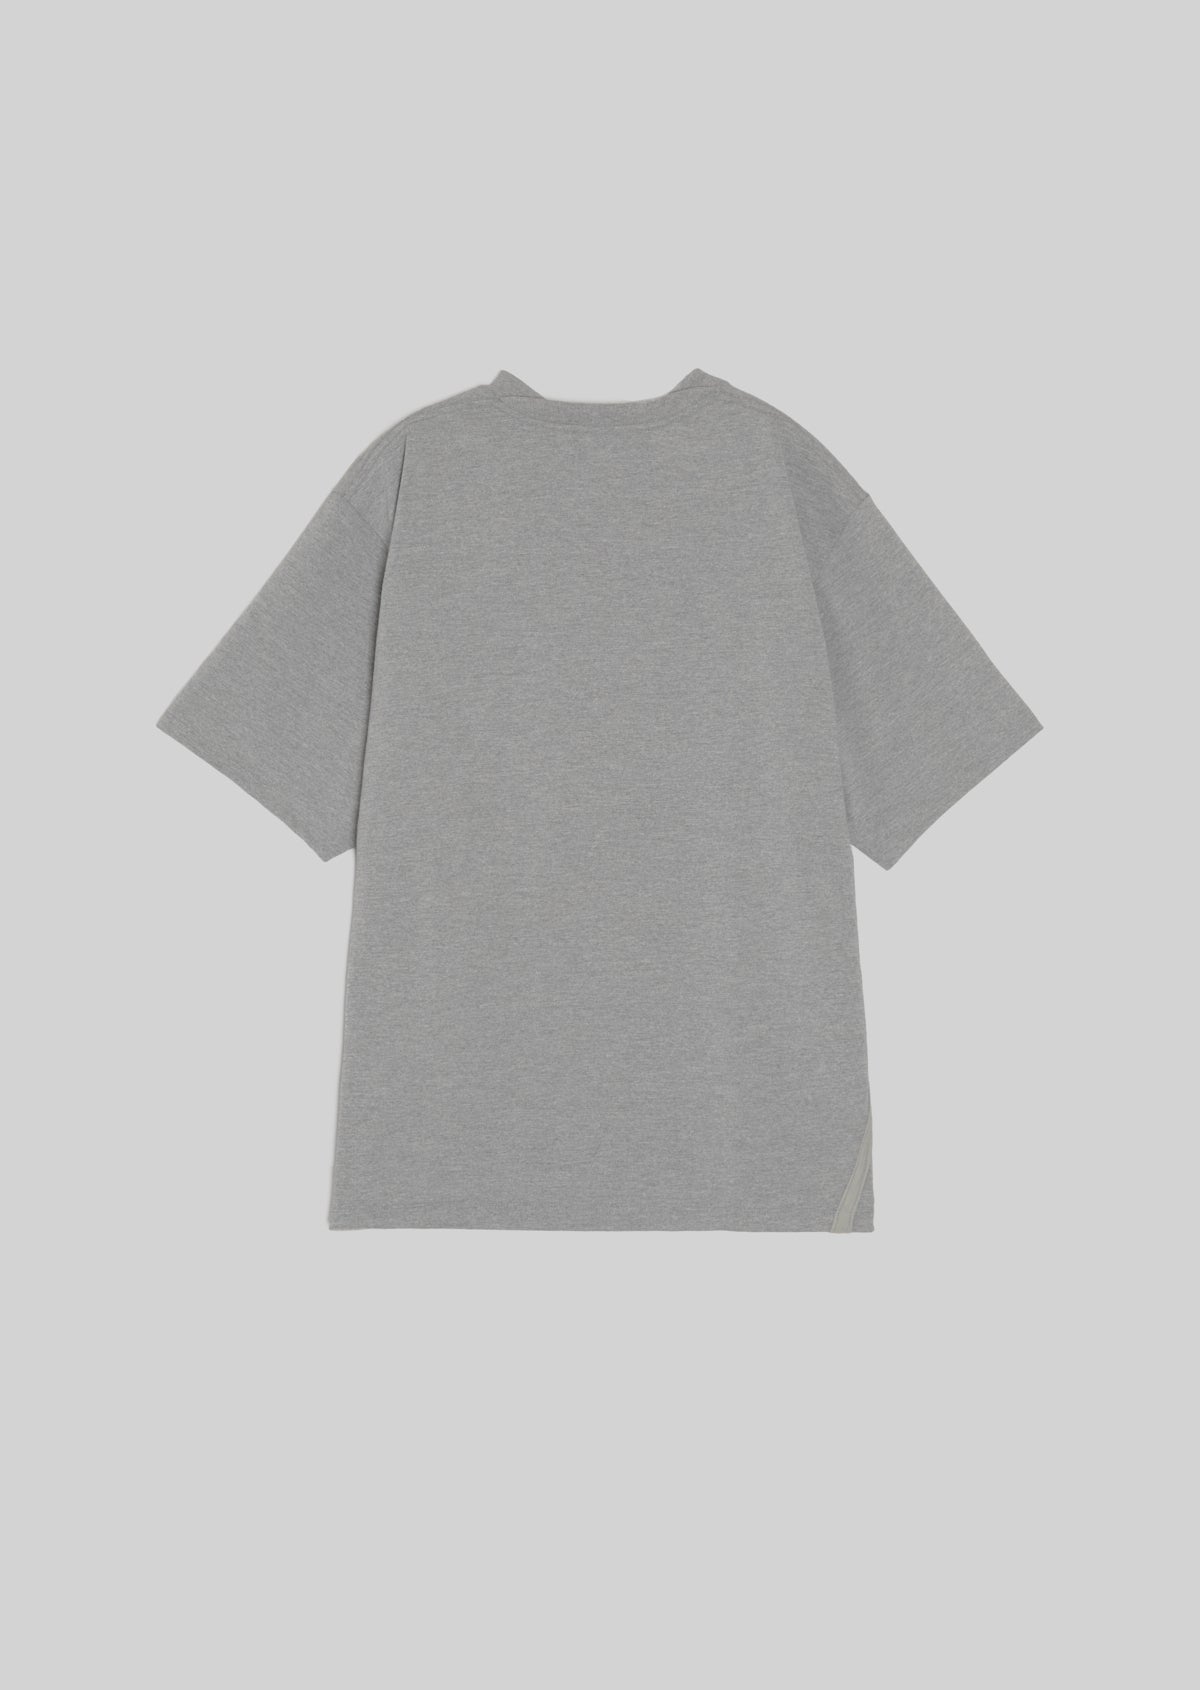 POLYESTER COTTON FEEL T-SHIRT GRAY 8001-1702